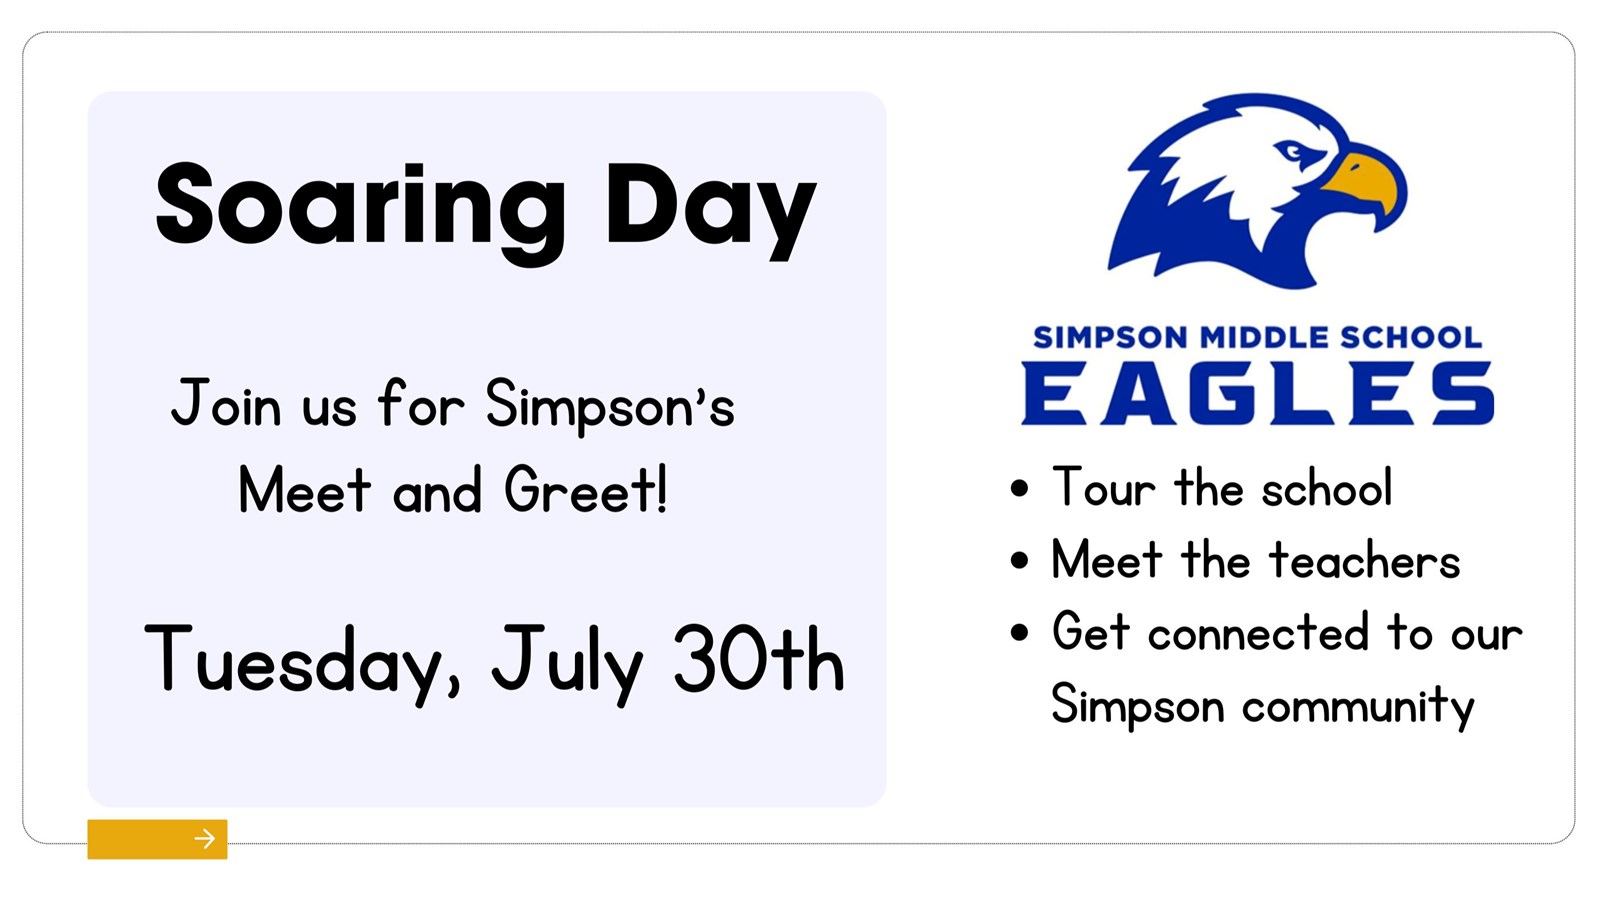 Soaring Day announcement